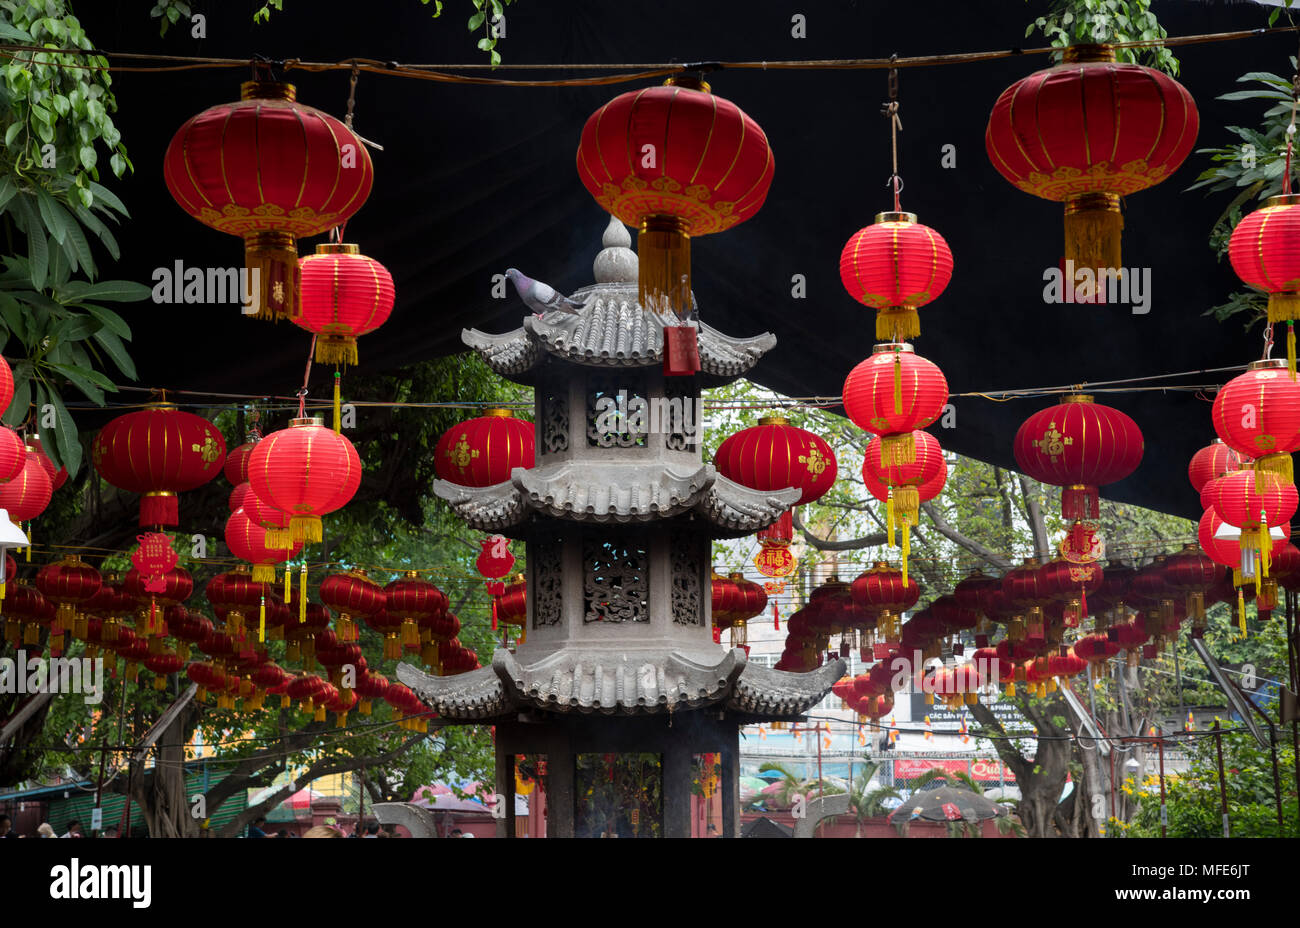 The Jade Emperor Pagoda Decorated With Red Lanterns For The Tet Lunar New Year Holiday In Ho Chi Minh City Vietnam Southeast Asia Stock Photo Alamy